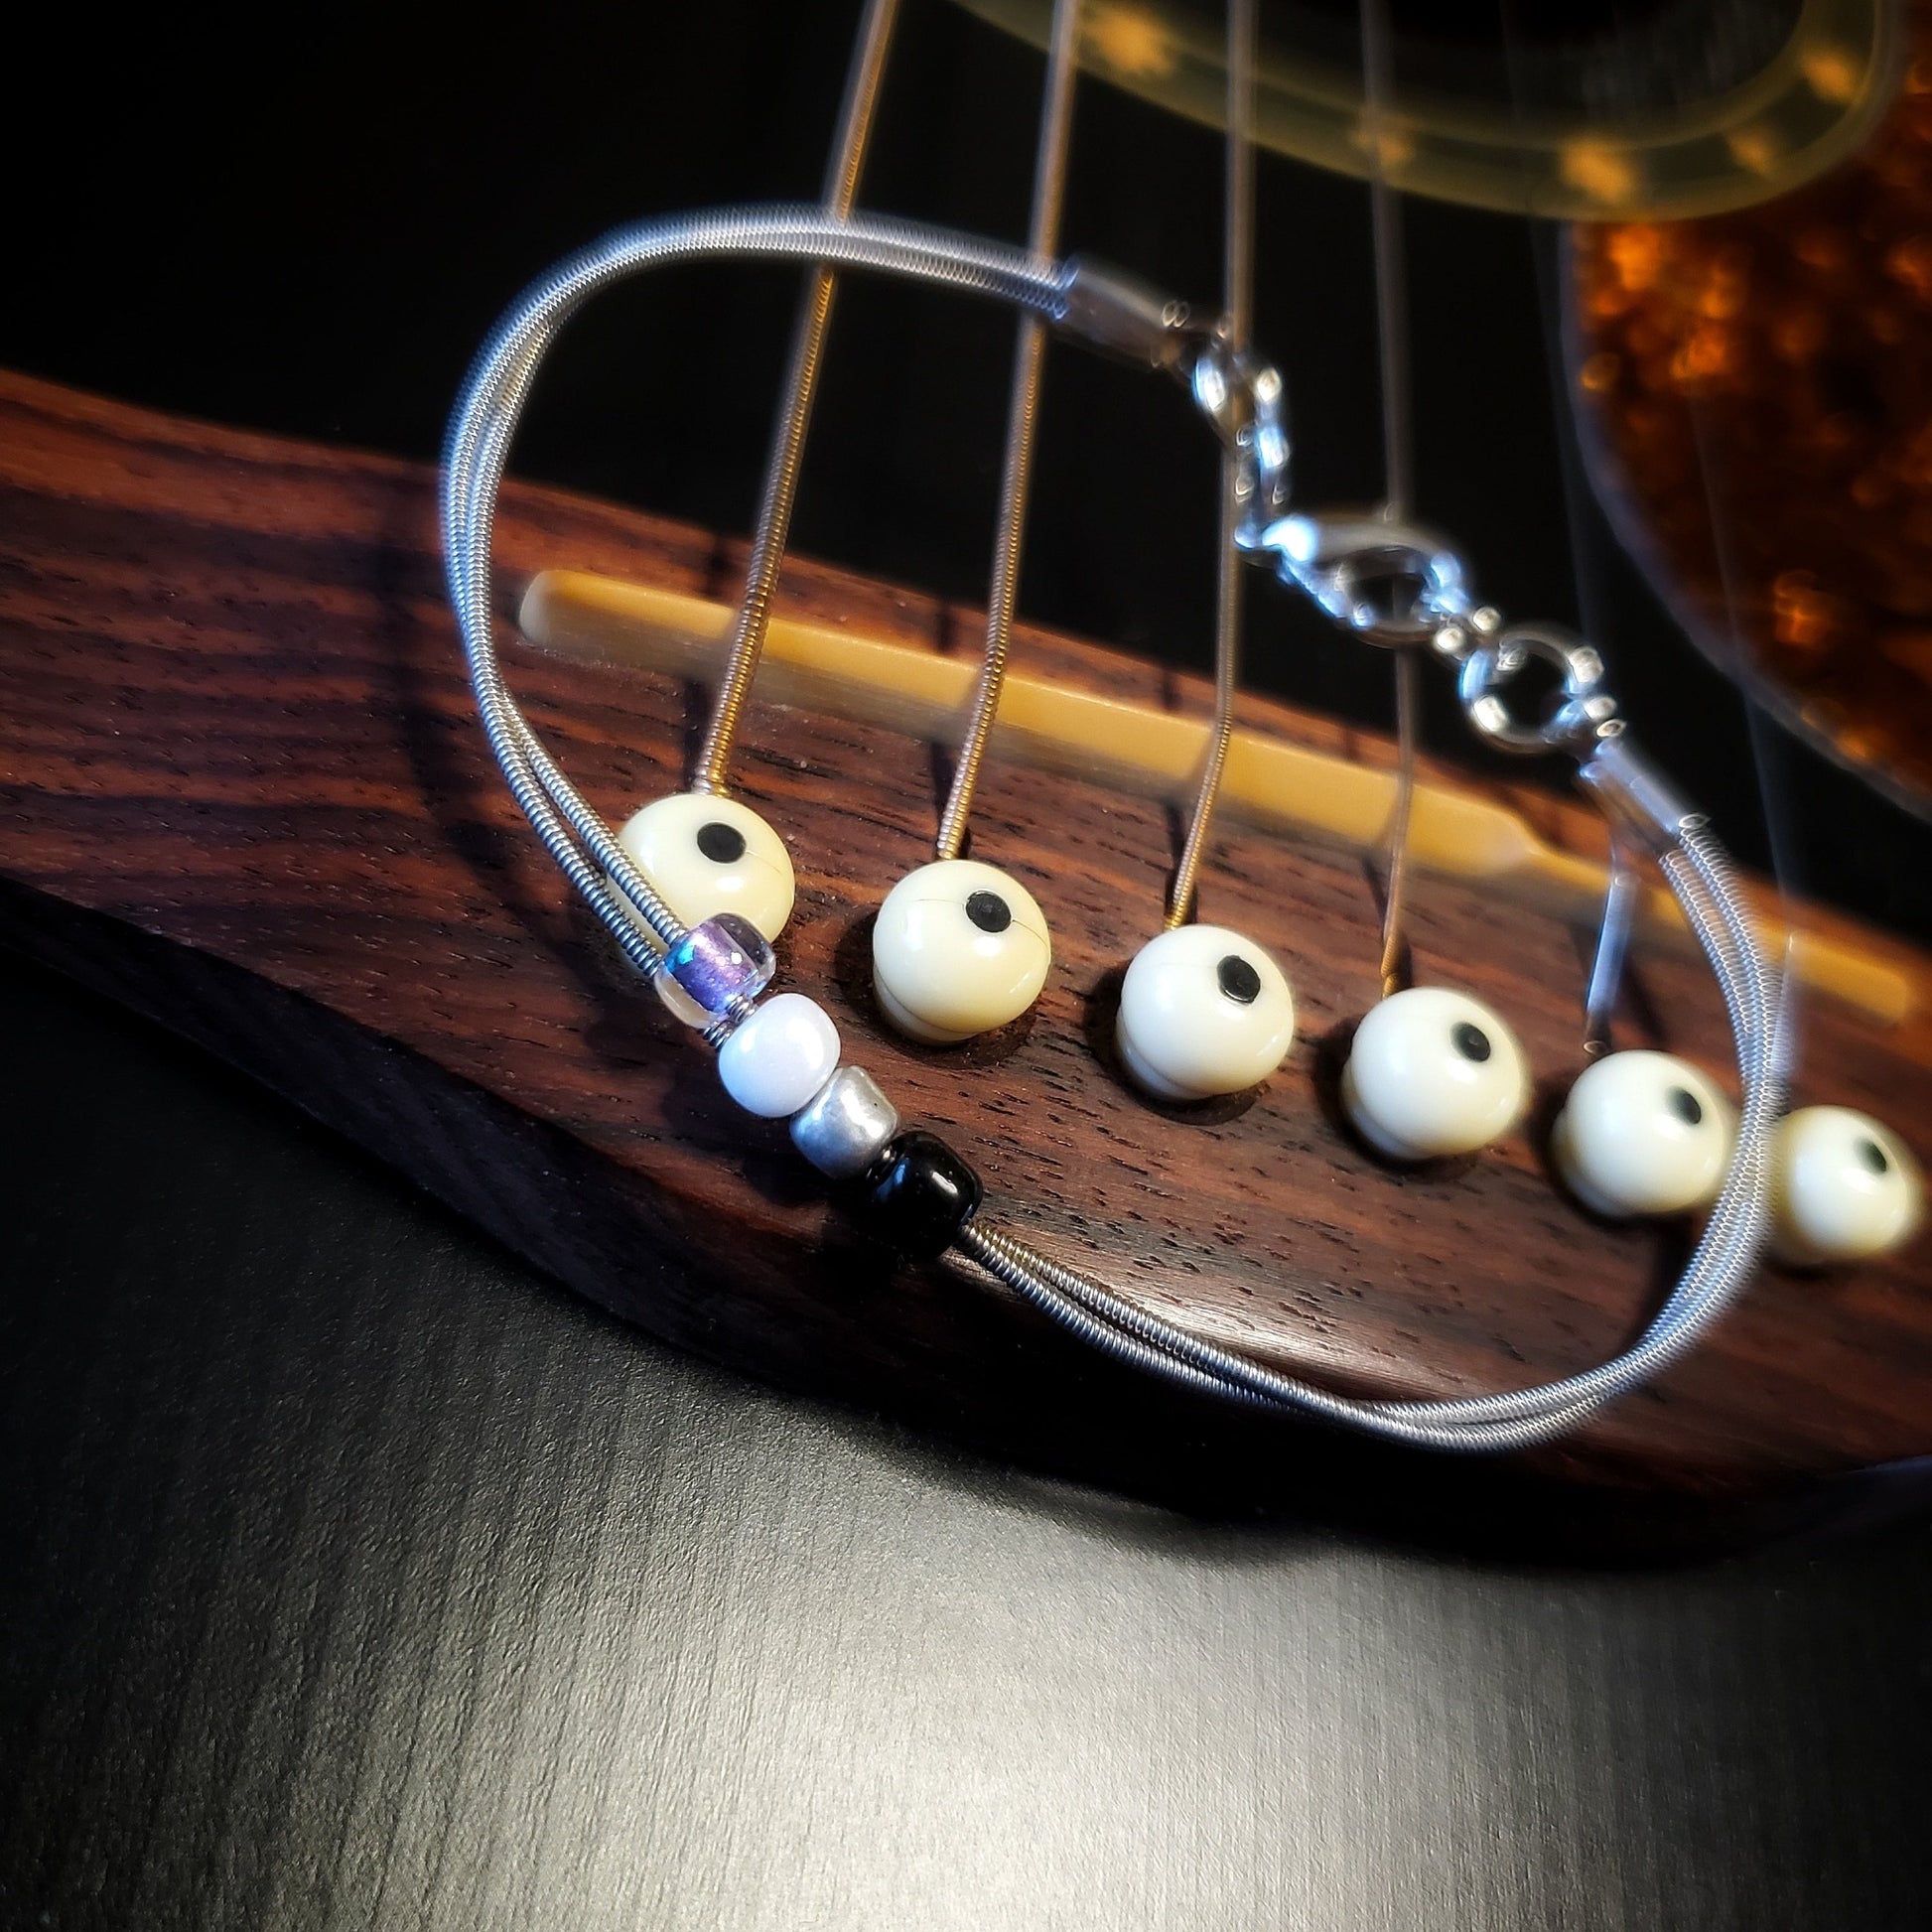 silver coloures clasp style bracelet with 4 glass beads representing the asexual pride flag (black, grey, white & purple) -bracelet is on the bridge of a black guitar